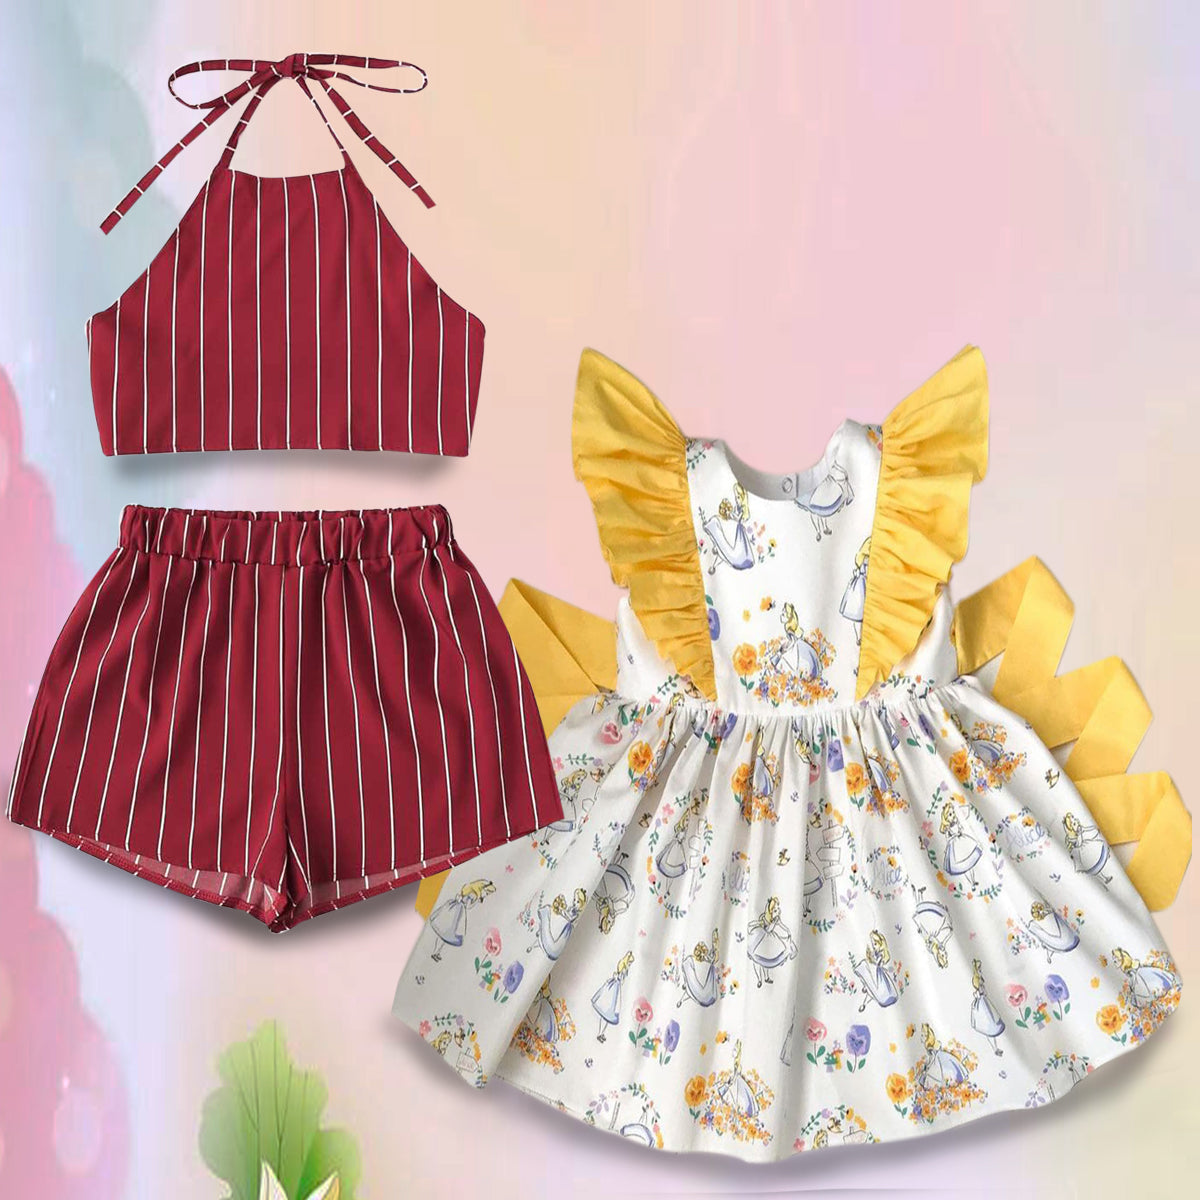 Stylish BabyGirl's Barbie Girl Dress & Maroon Top Sleeveless And Shorts Combo for Kids.